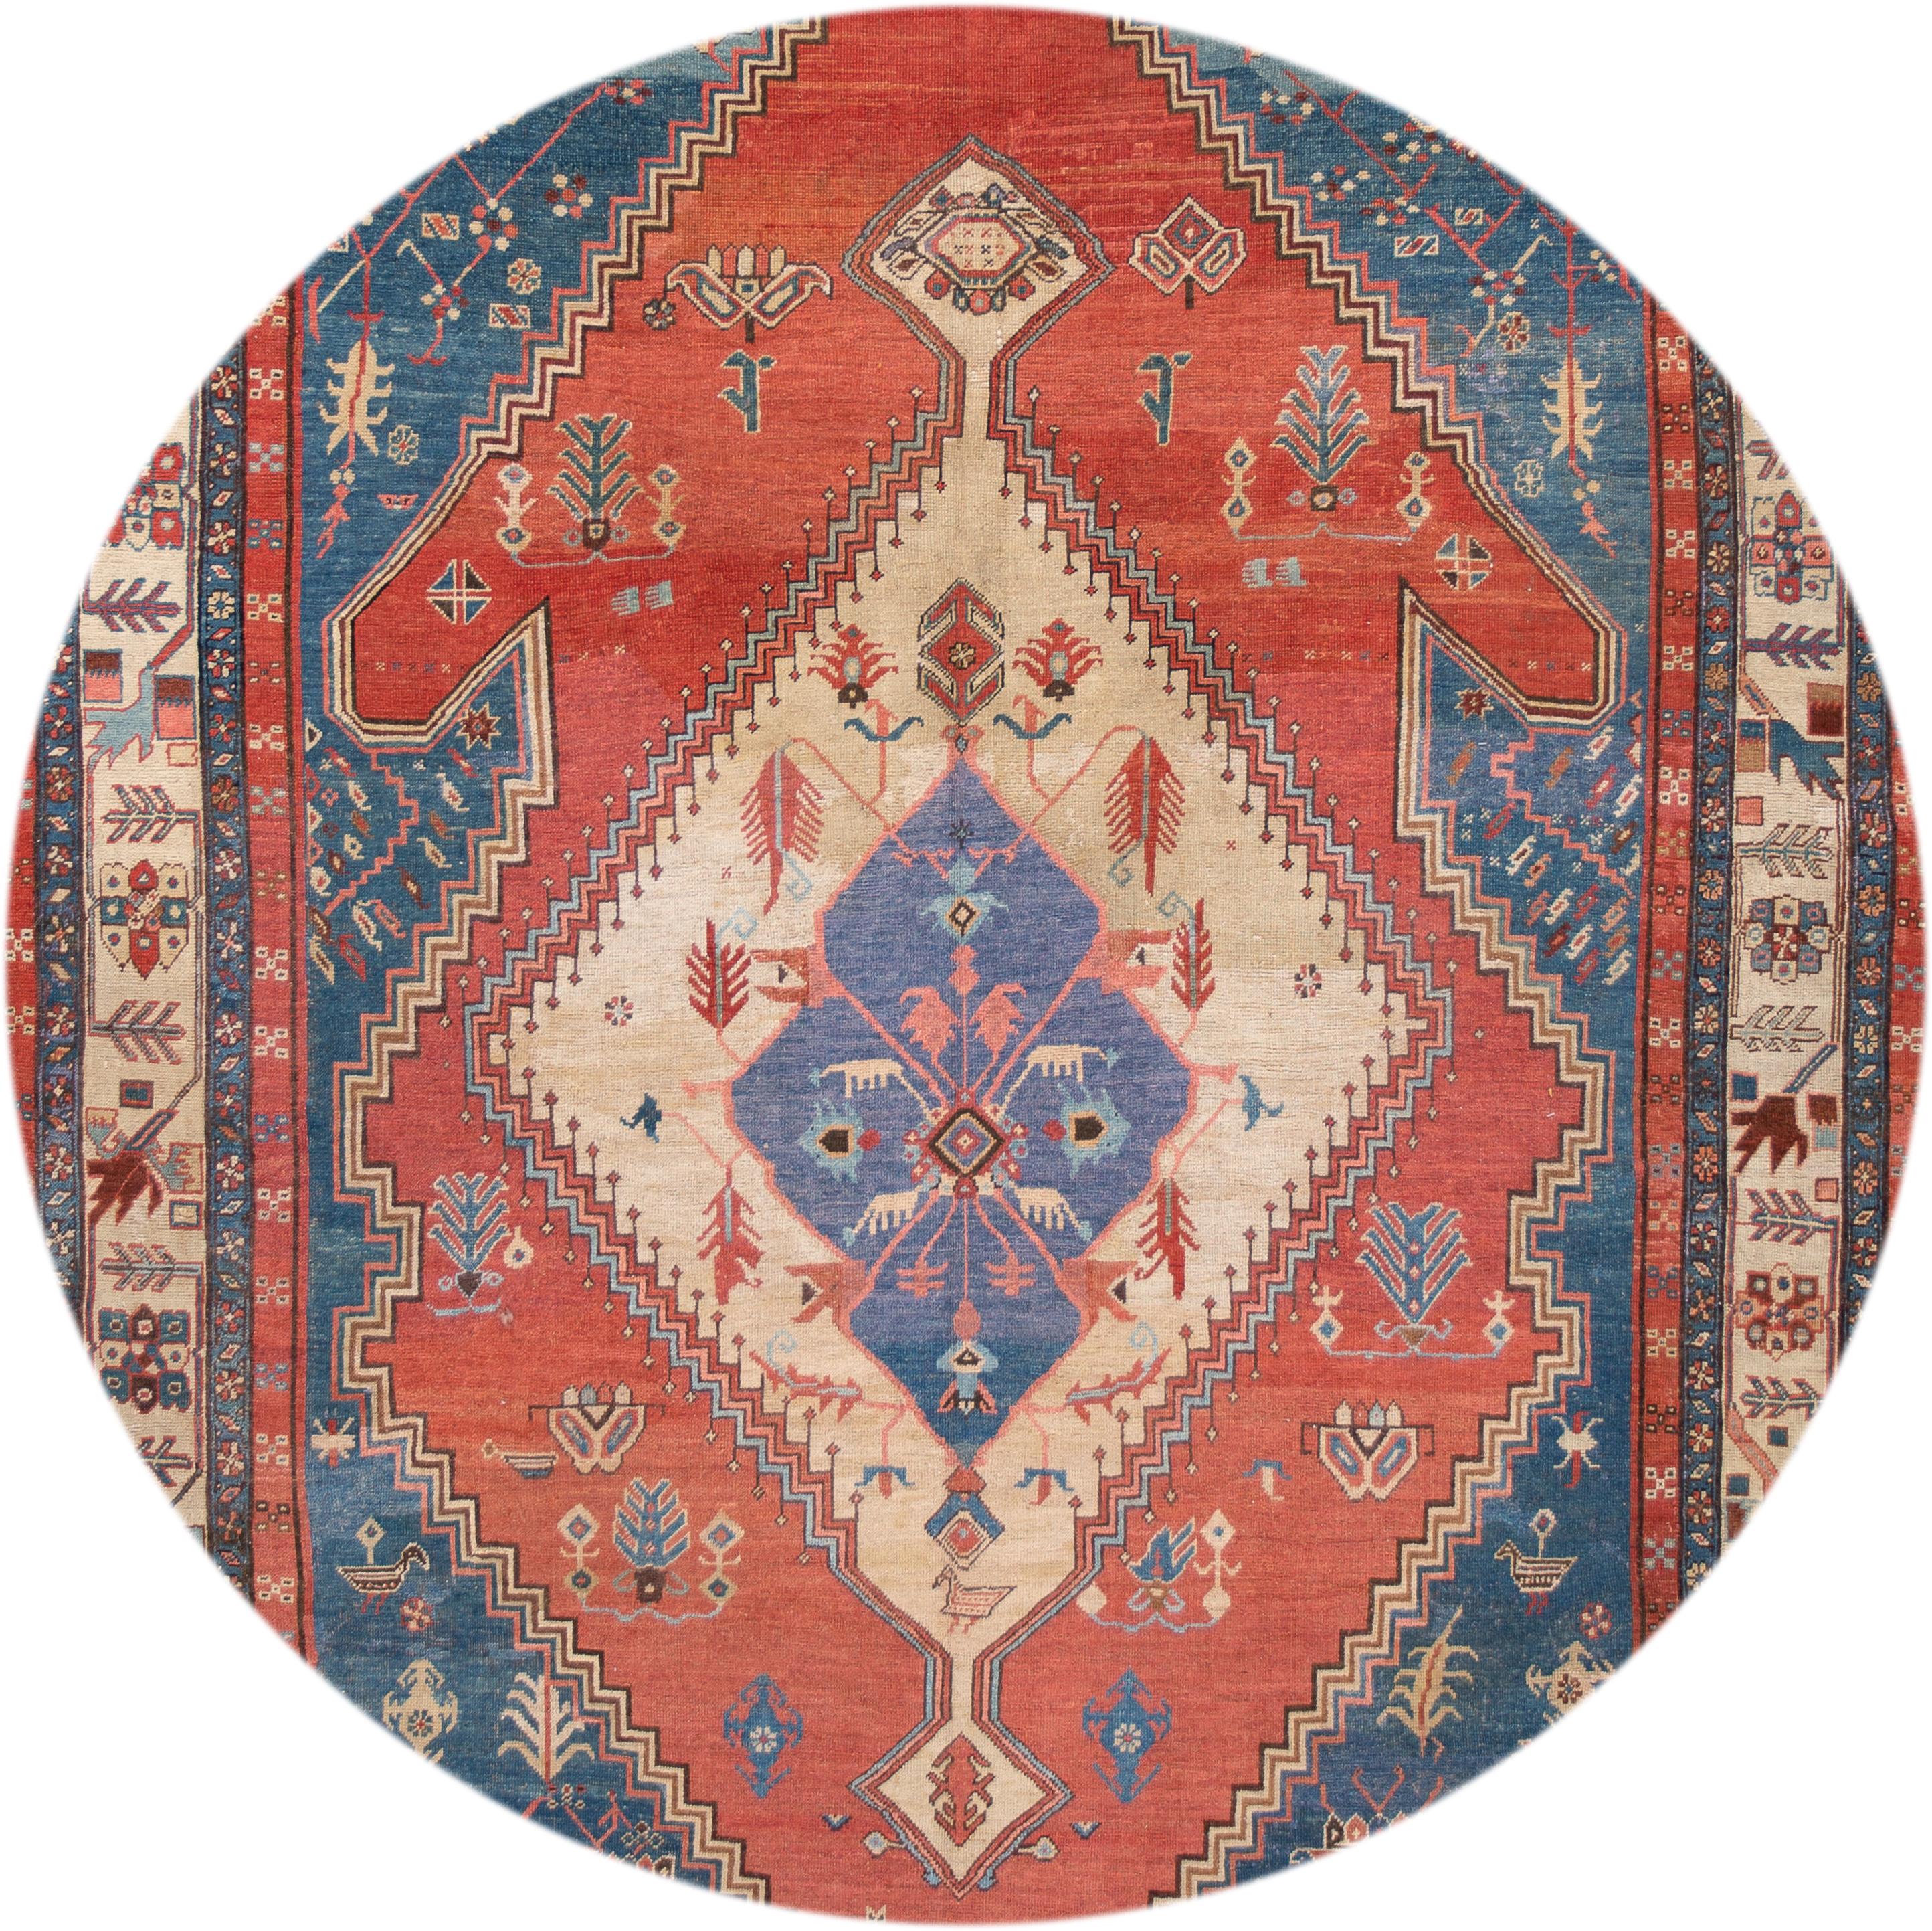 Beautiful antique Persian Bakshaish hand-knotted rug with a blue and rusted field. This Persian rug has beige accents in an all-over Classic medallion design.
circa 1890
This rug measures 7' 6